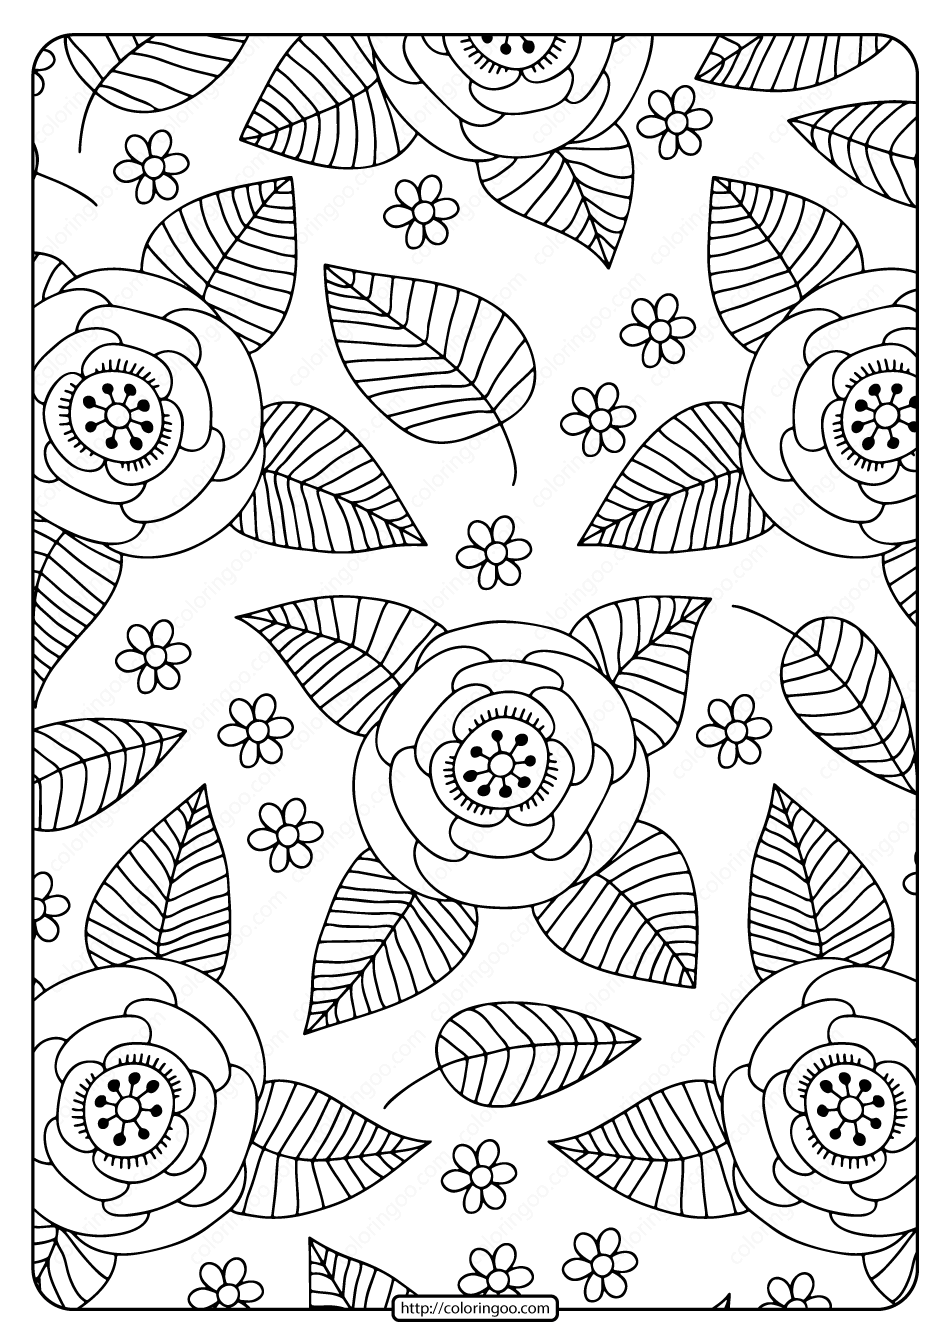 Free Printable Flower Pattern Coloring Page 08